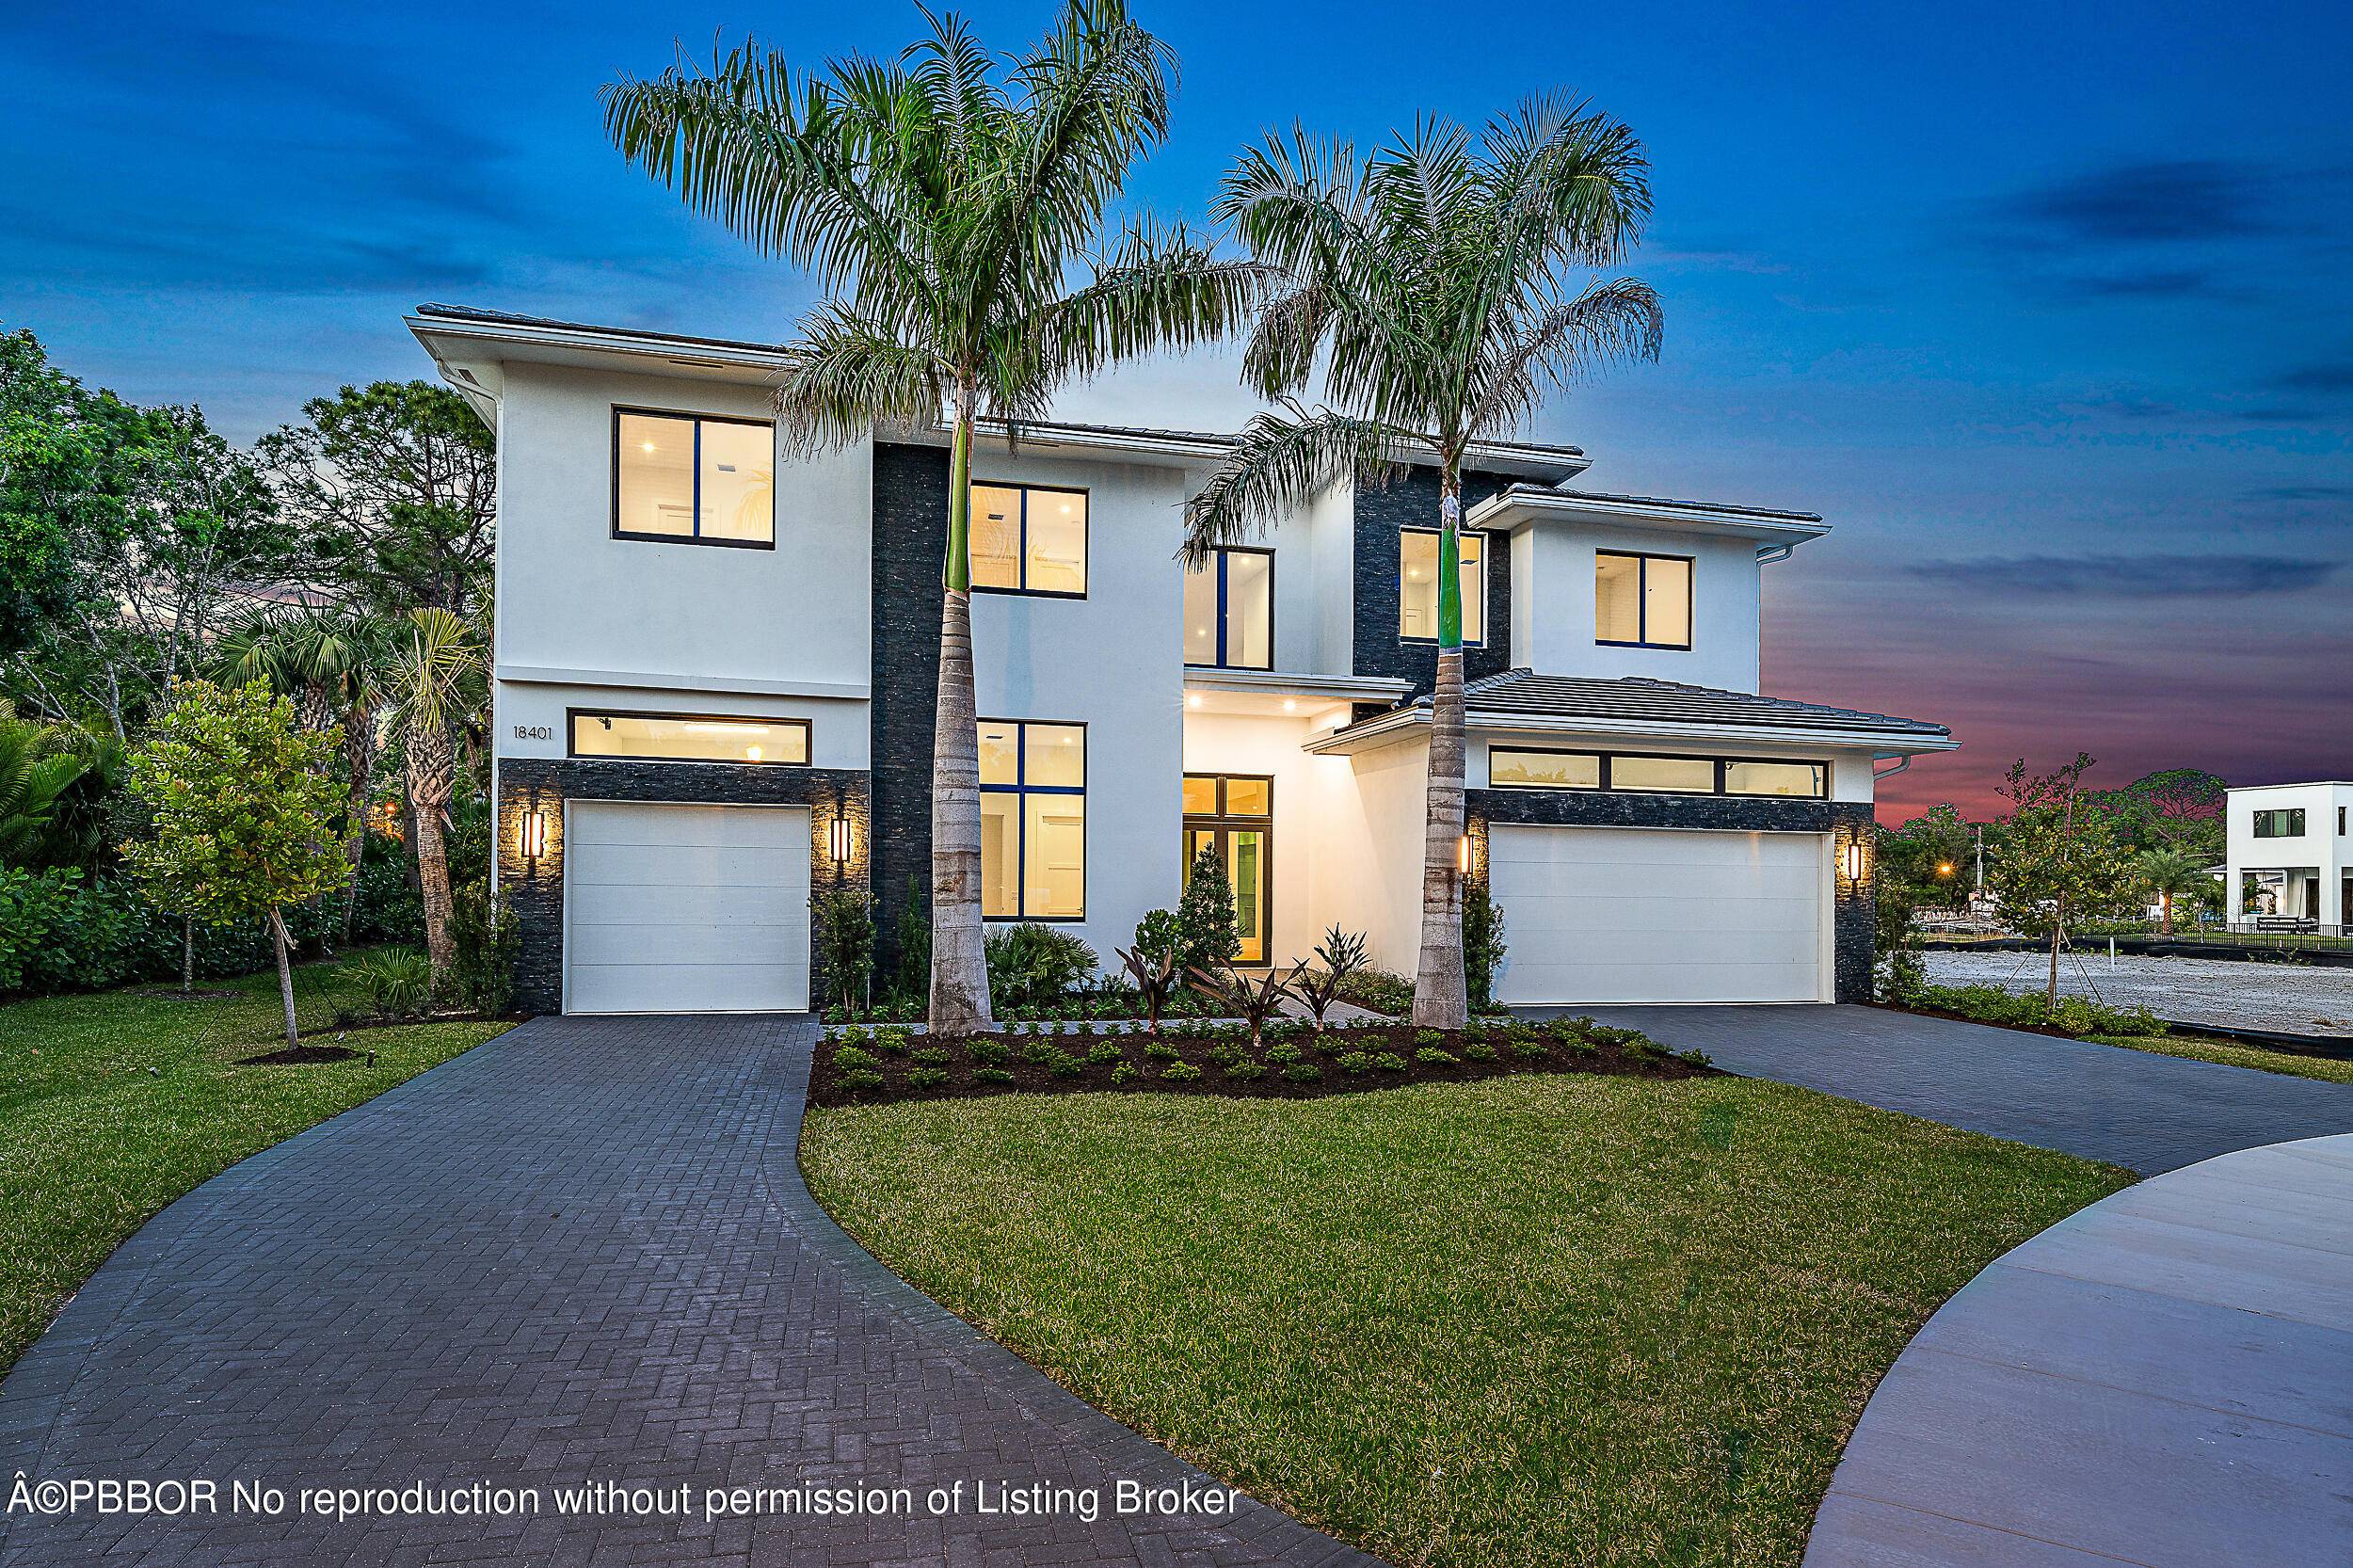 Located in Jupiter, FL's new ''Symphony'' community, this elegant home showcases the ''Tahoe'' design, featuring five bedrooms, five bathrooms, and a three car garage.